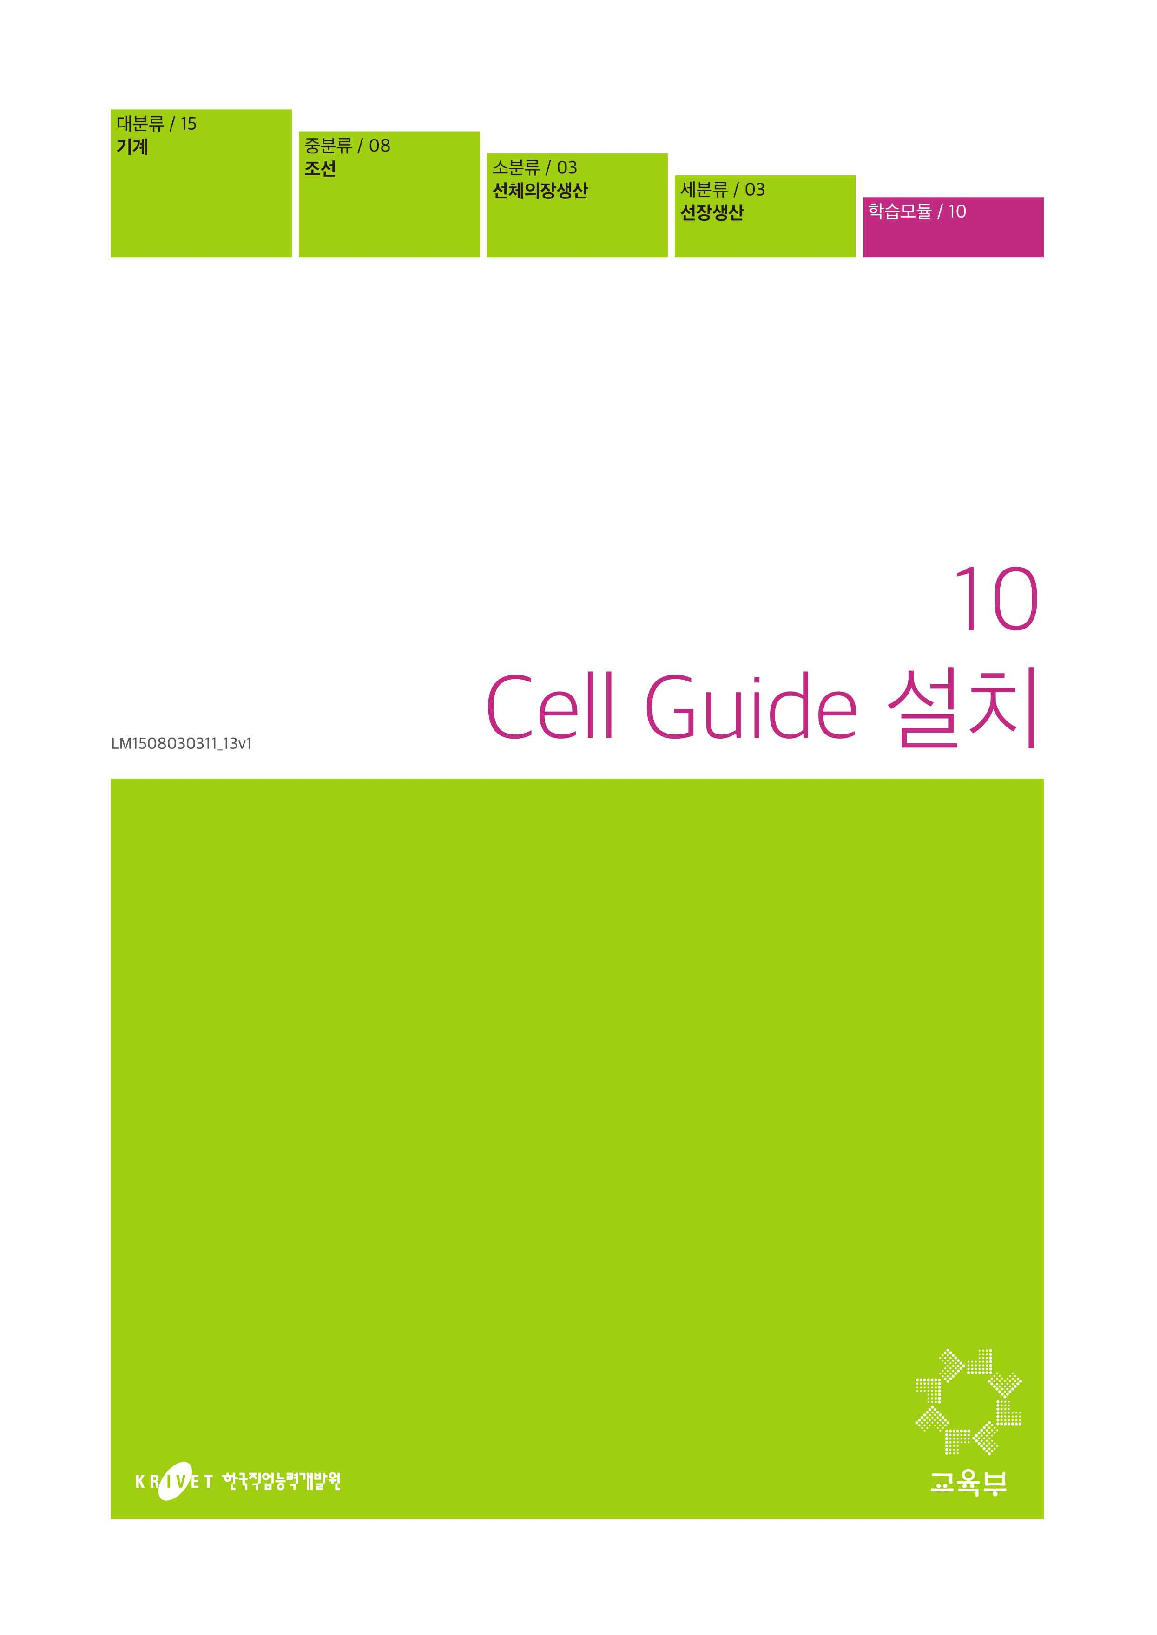 10. Cell Guide 설치